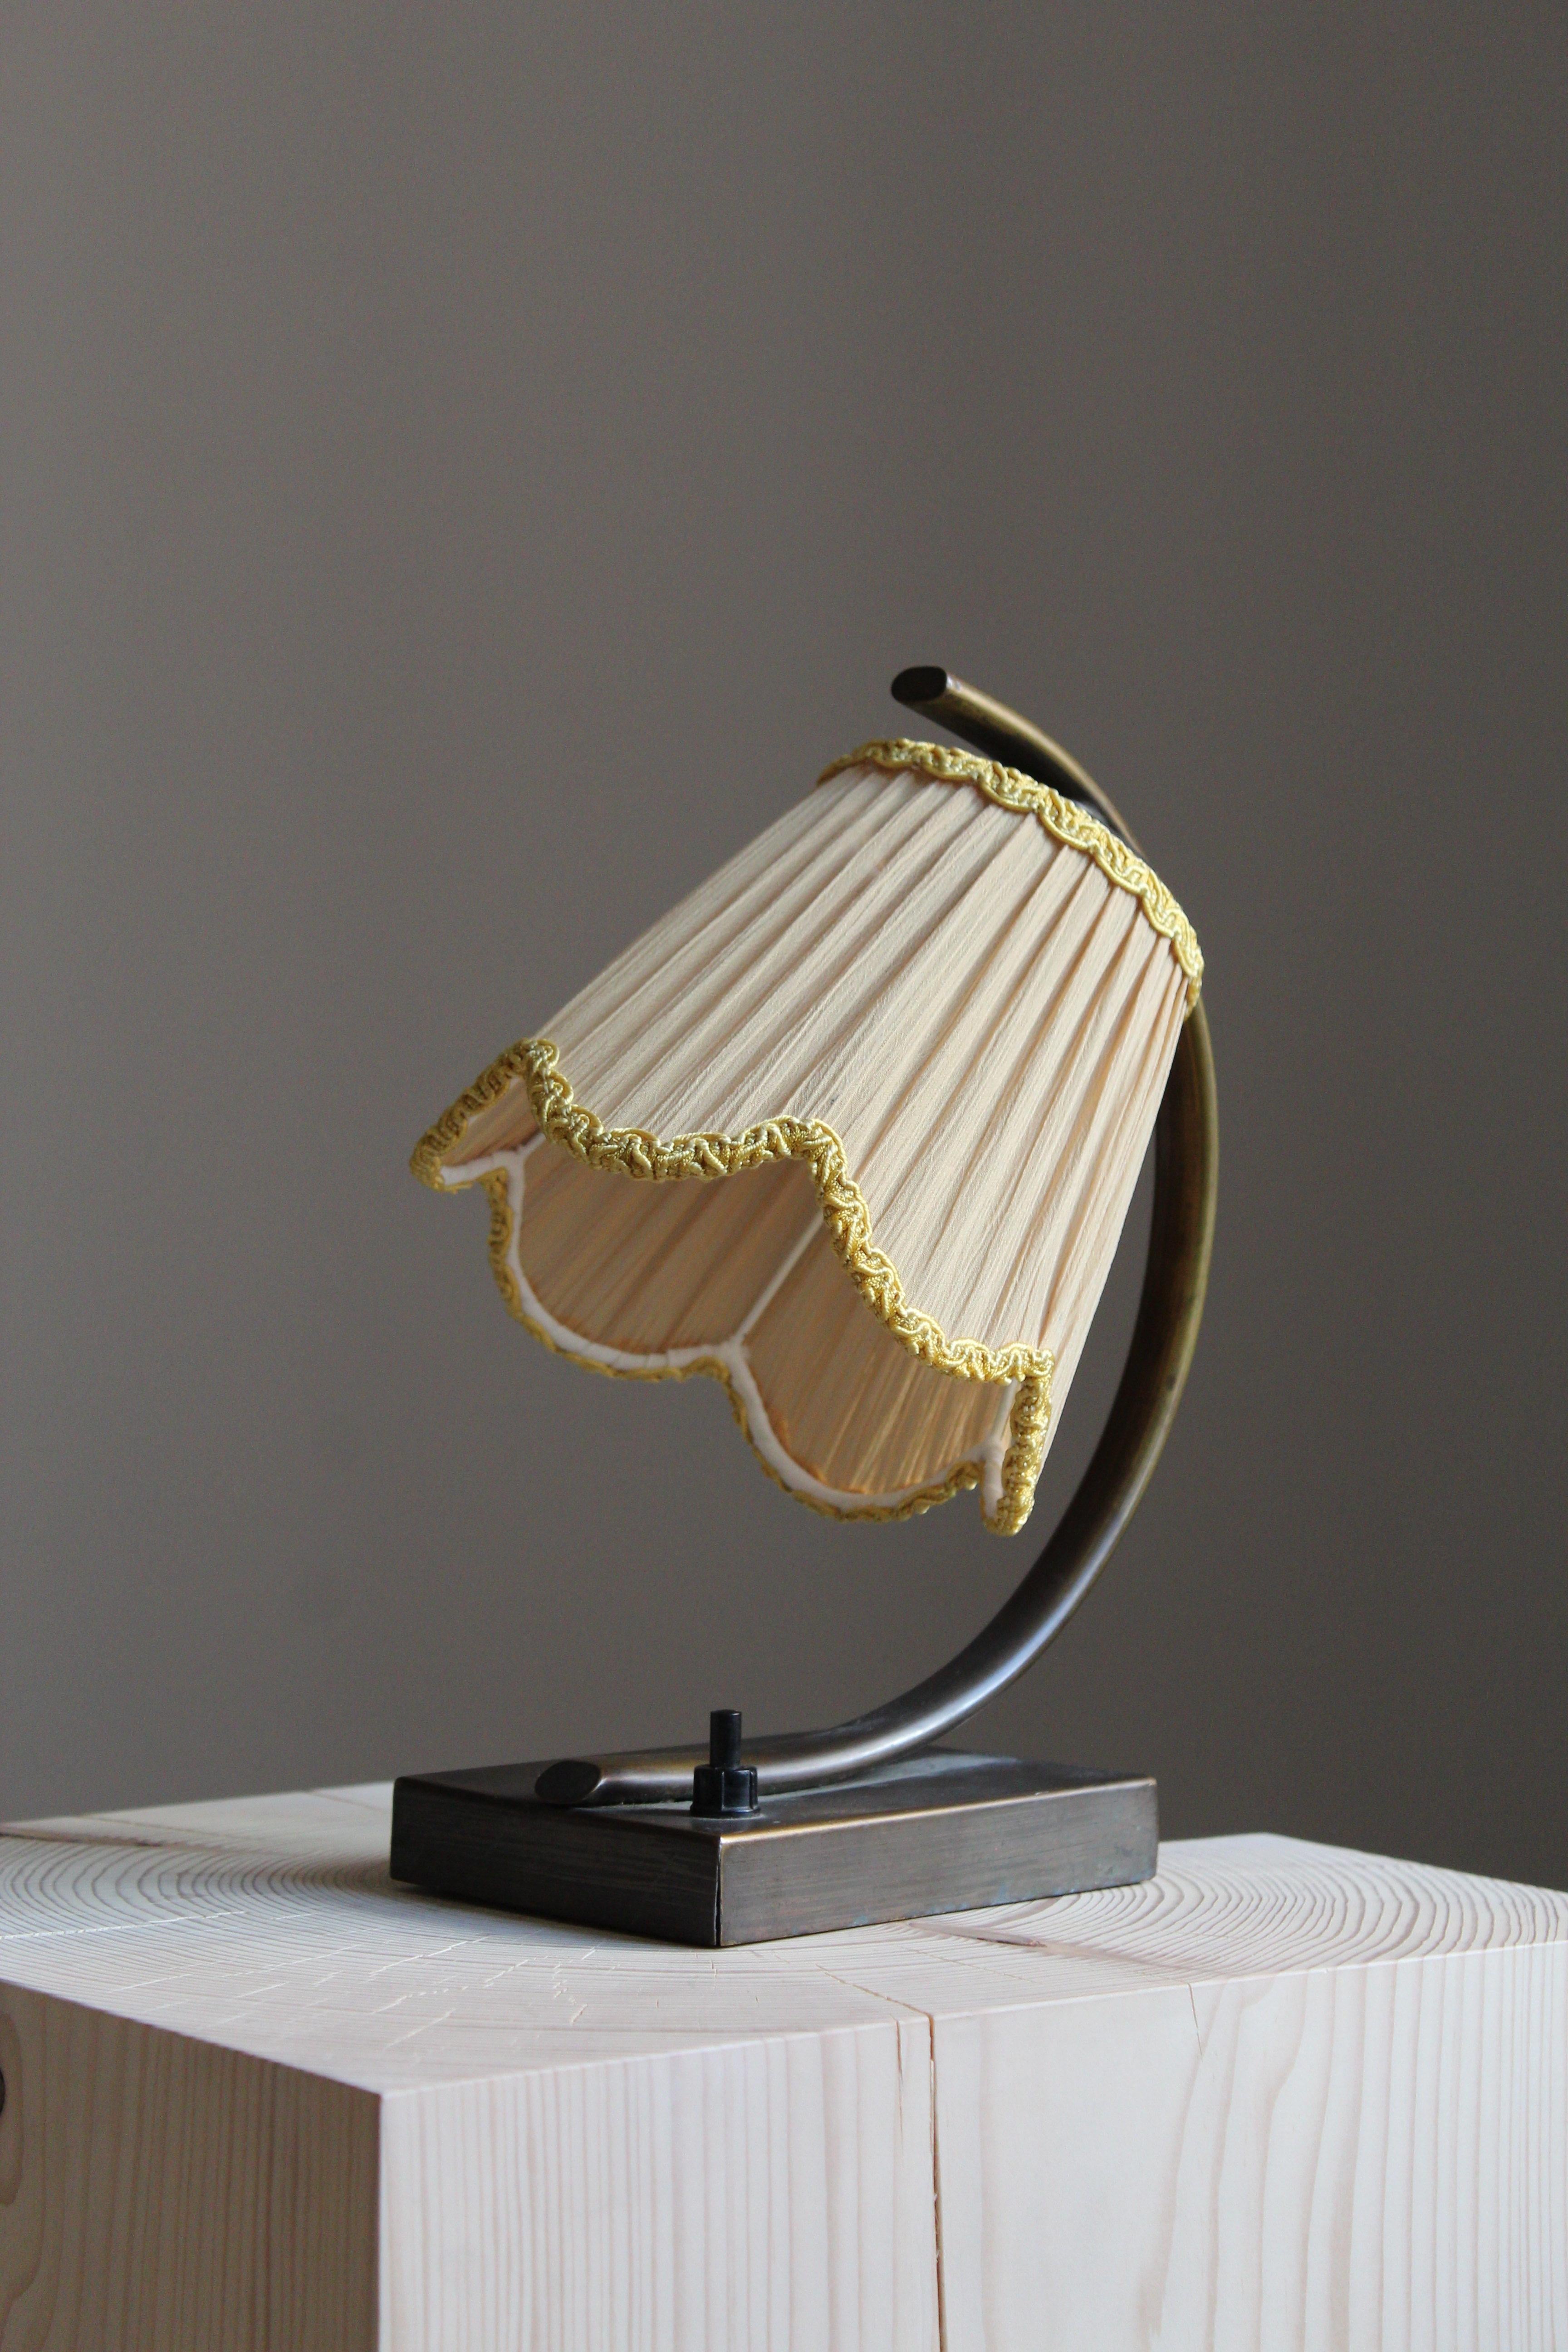 A modernist table lamp / desk light. In patinated brass. Fabric lampshade. Stamped.

Later lampshade in very good condition.

Other designers of the period include Paavo Tynell, Alvar Aalto, Hans Bergström, Lisa Johansson-Pape, and Josef Frank.